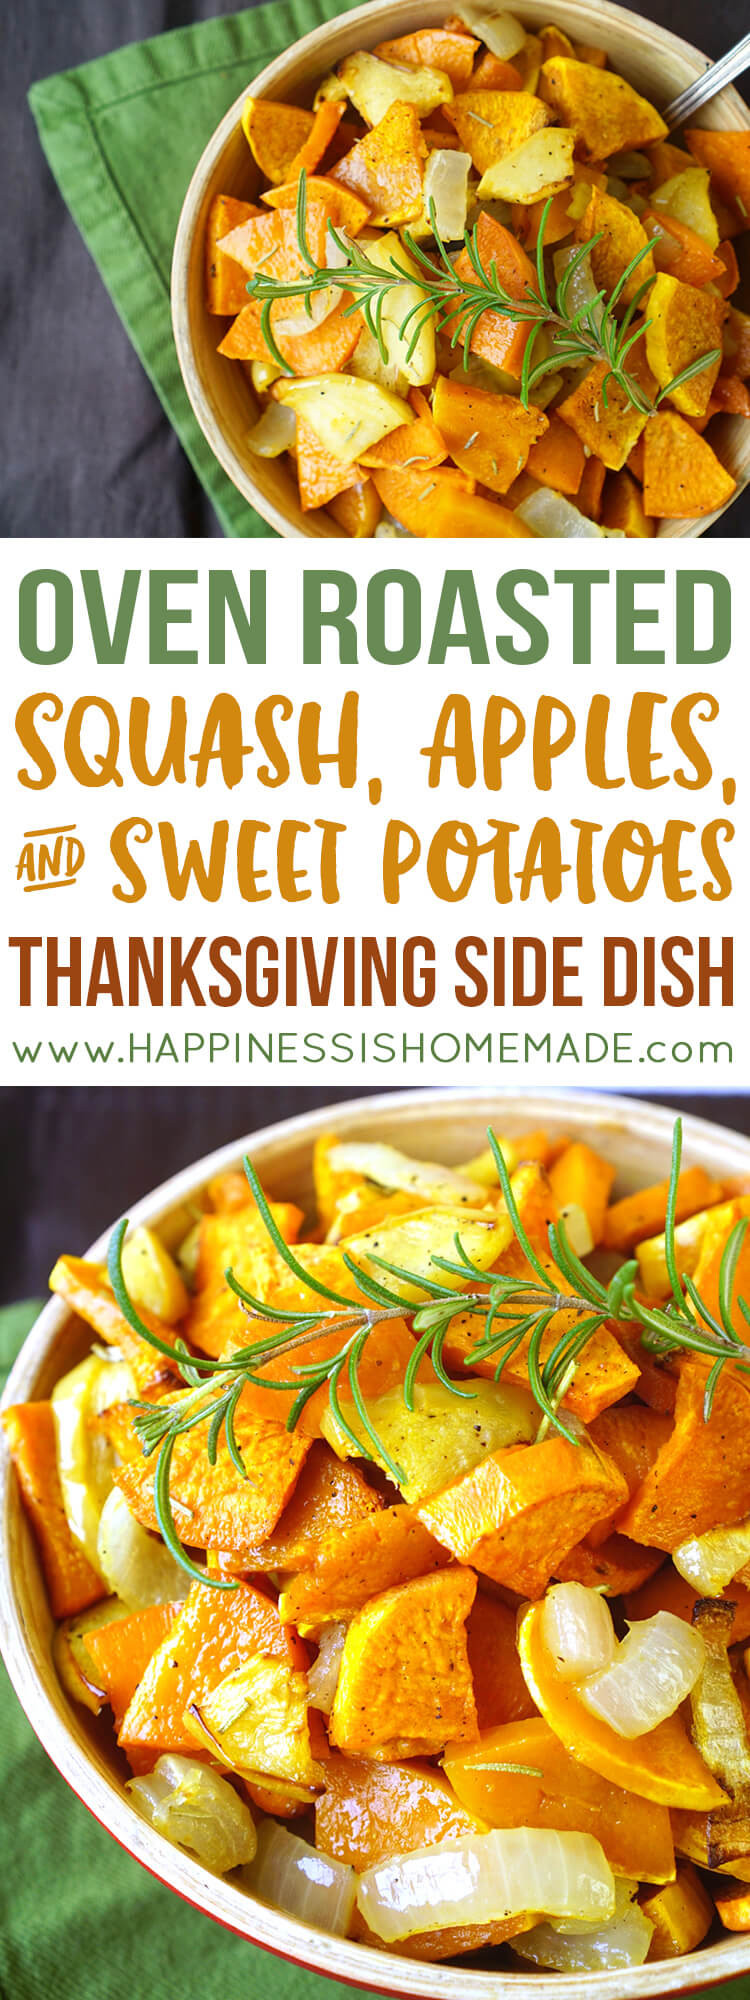 Thanksgiving Roasted Sweet Potatoes
 Roasted Sweet Potatoes Squash & Apples Happiness is